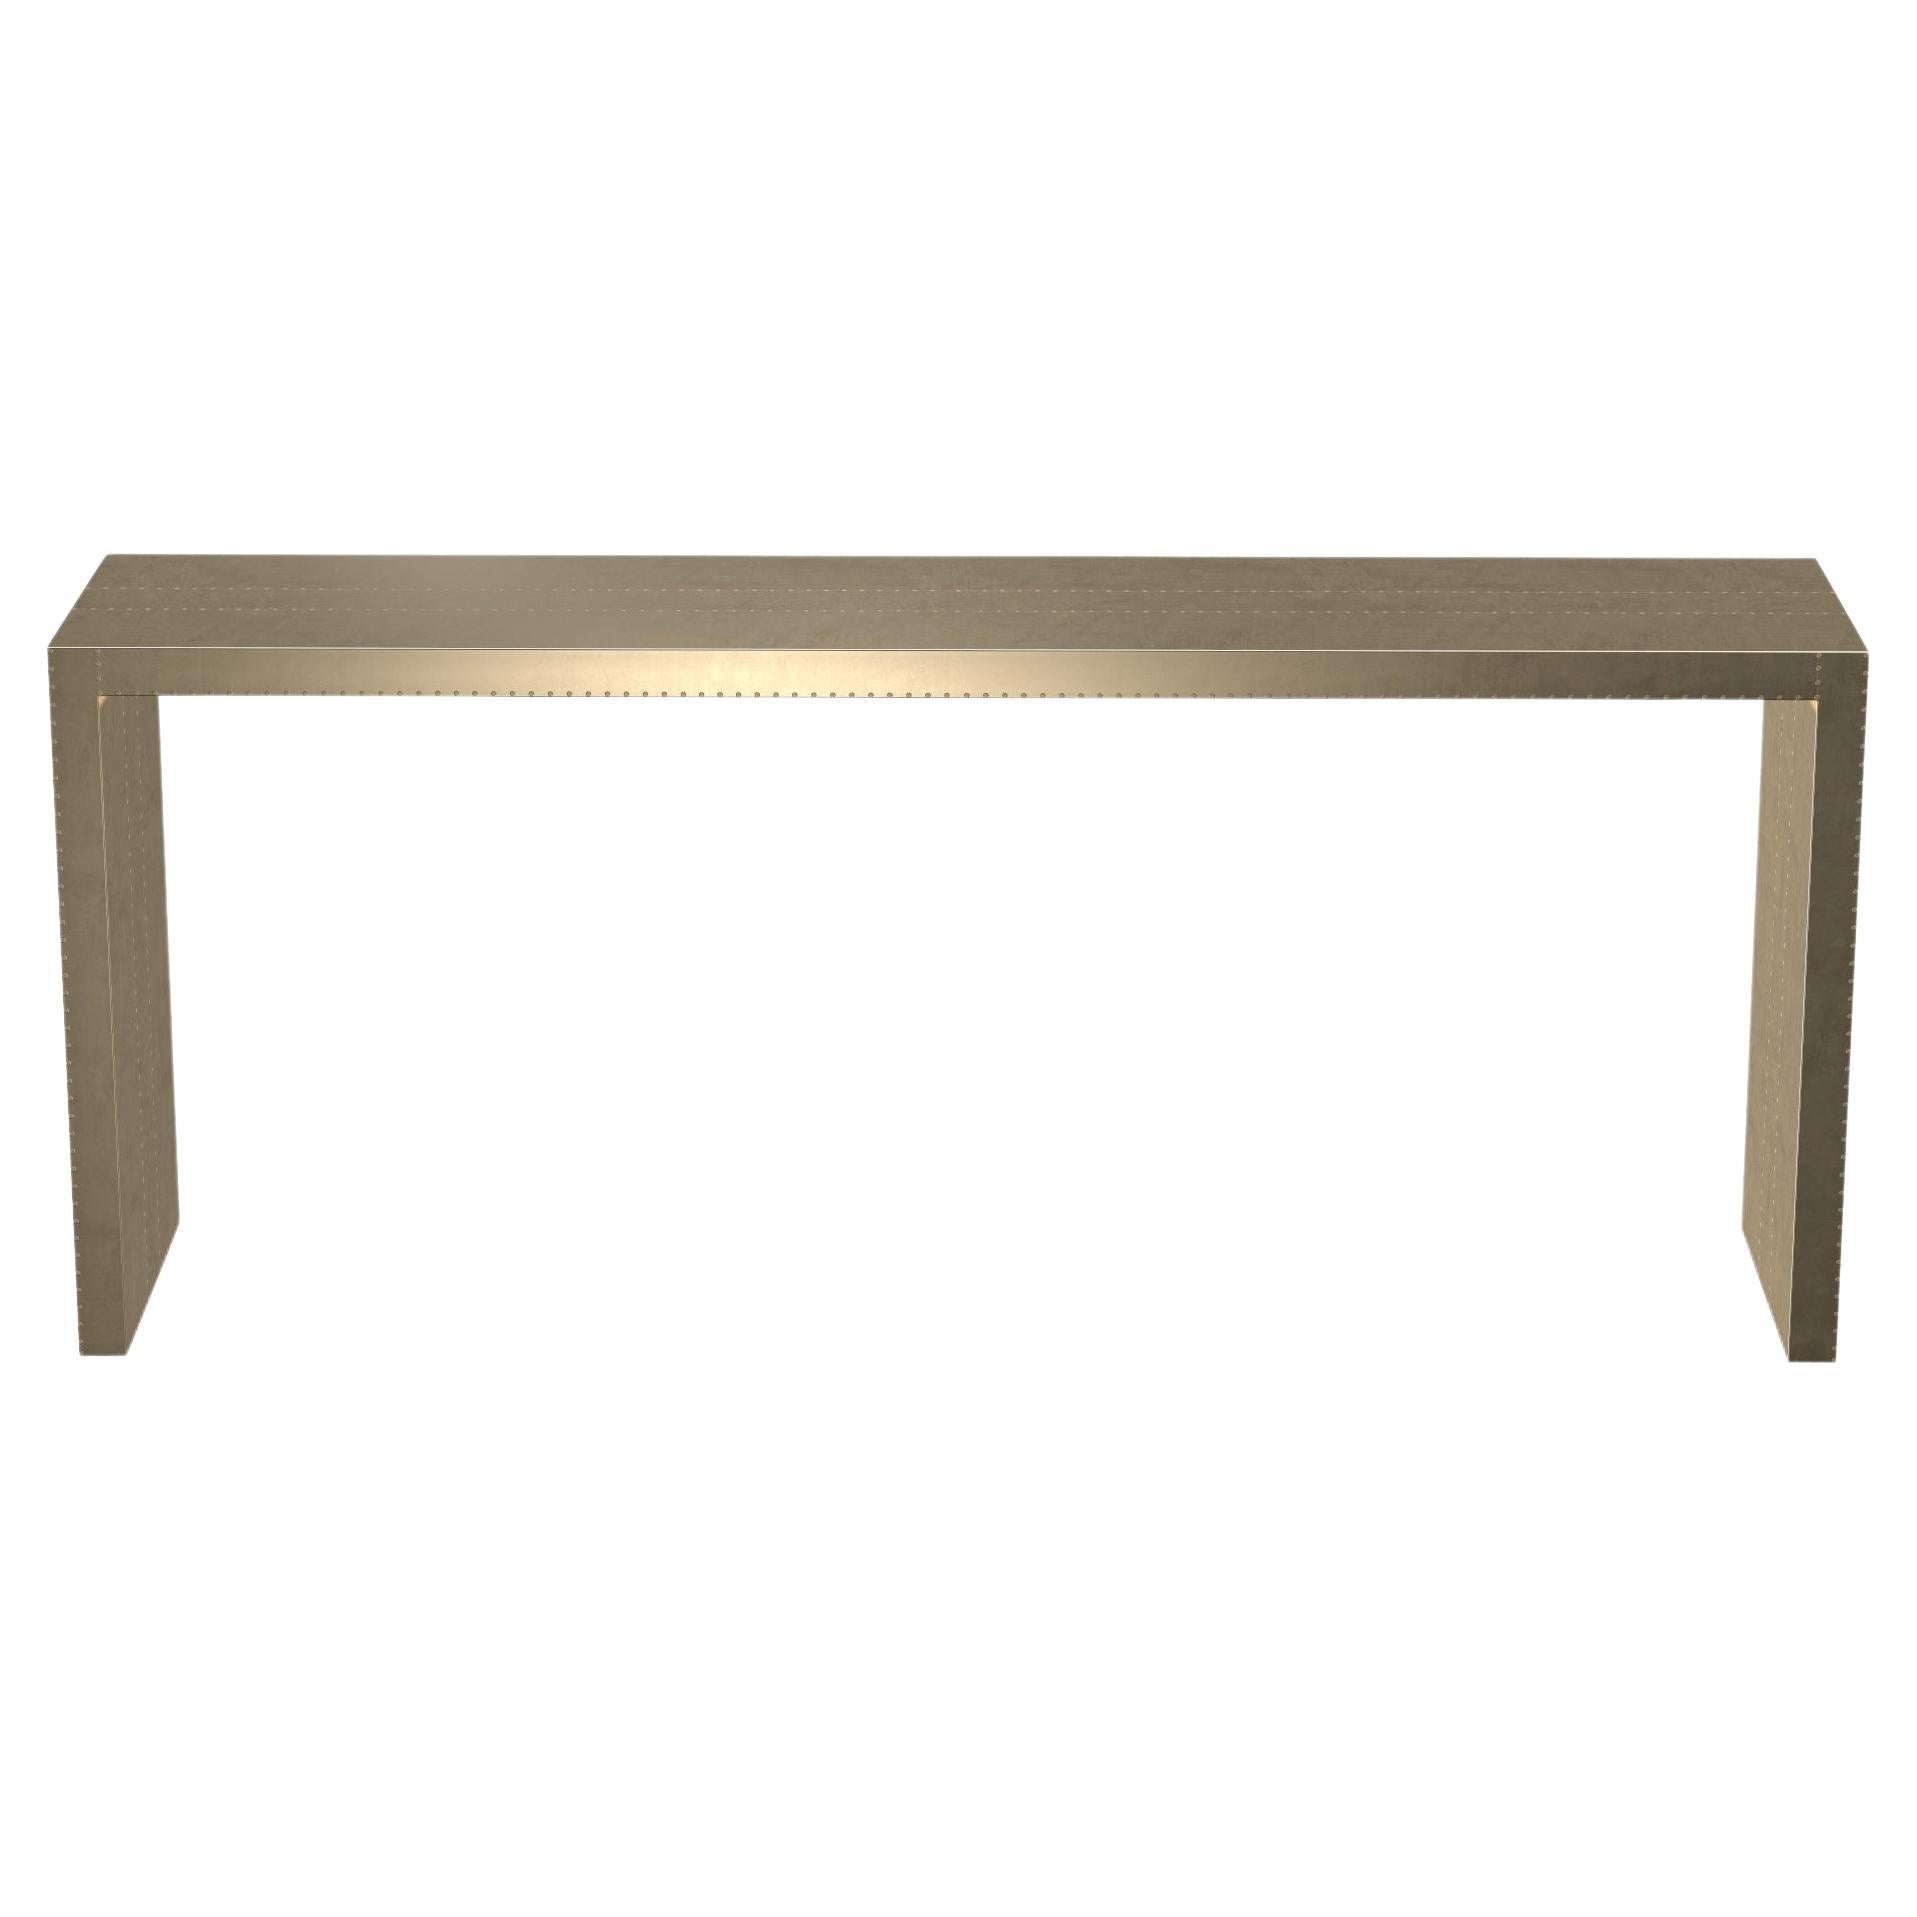 Art Deco Game Tables Rectangular Console in Smooth Brass by Alison Spear For Sale